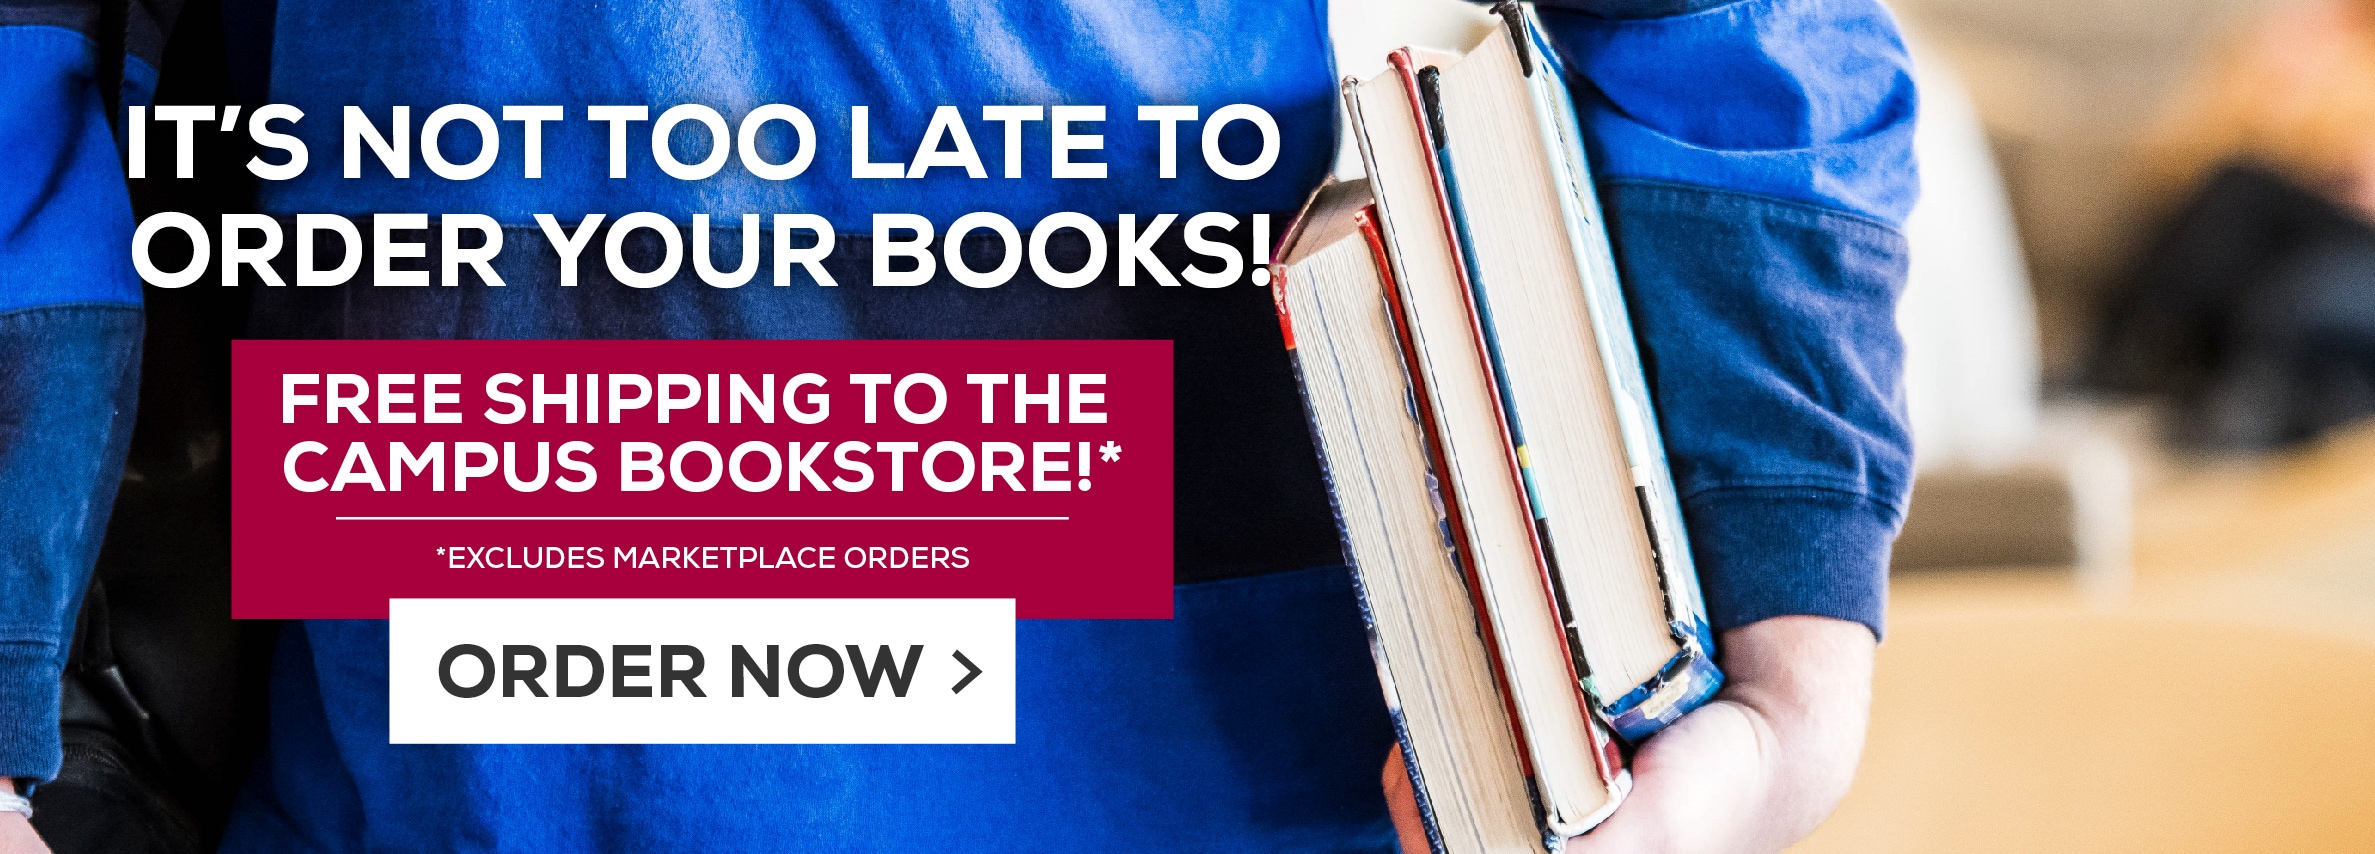 It's not too late to order your books! Free shipping to the campus bookstore!* Excludes marketplace purchases. Order Now.